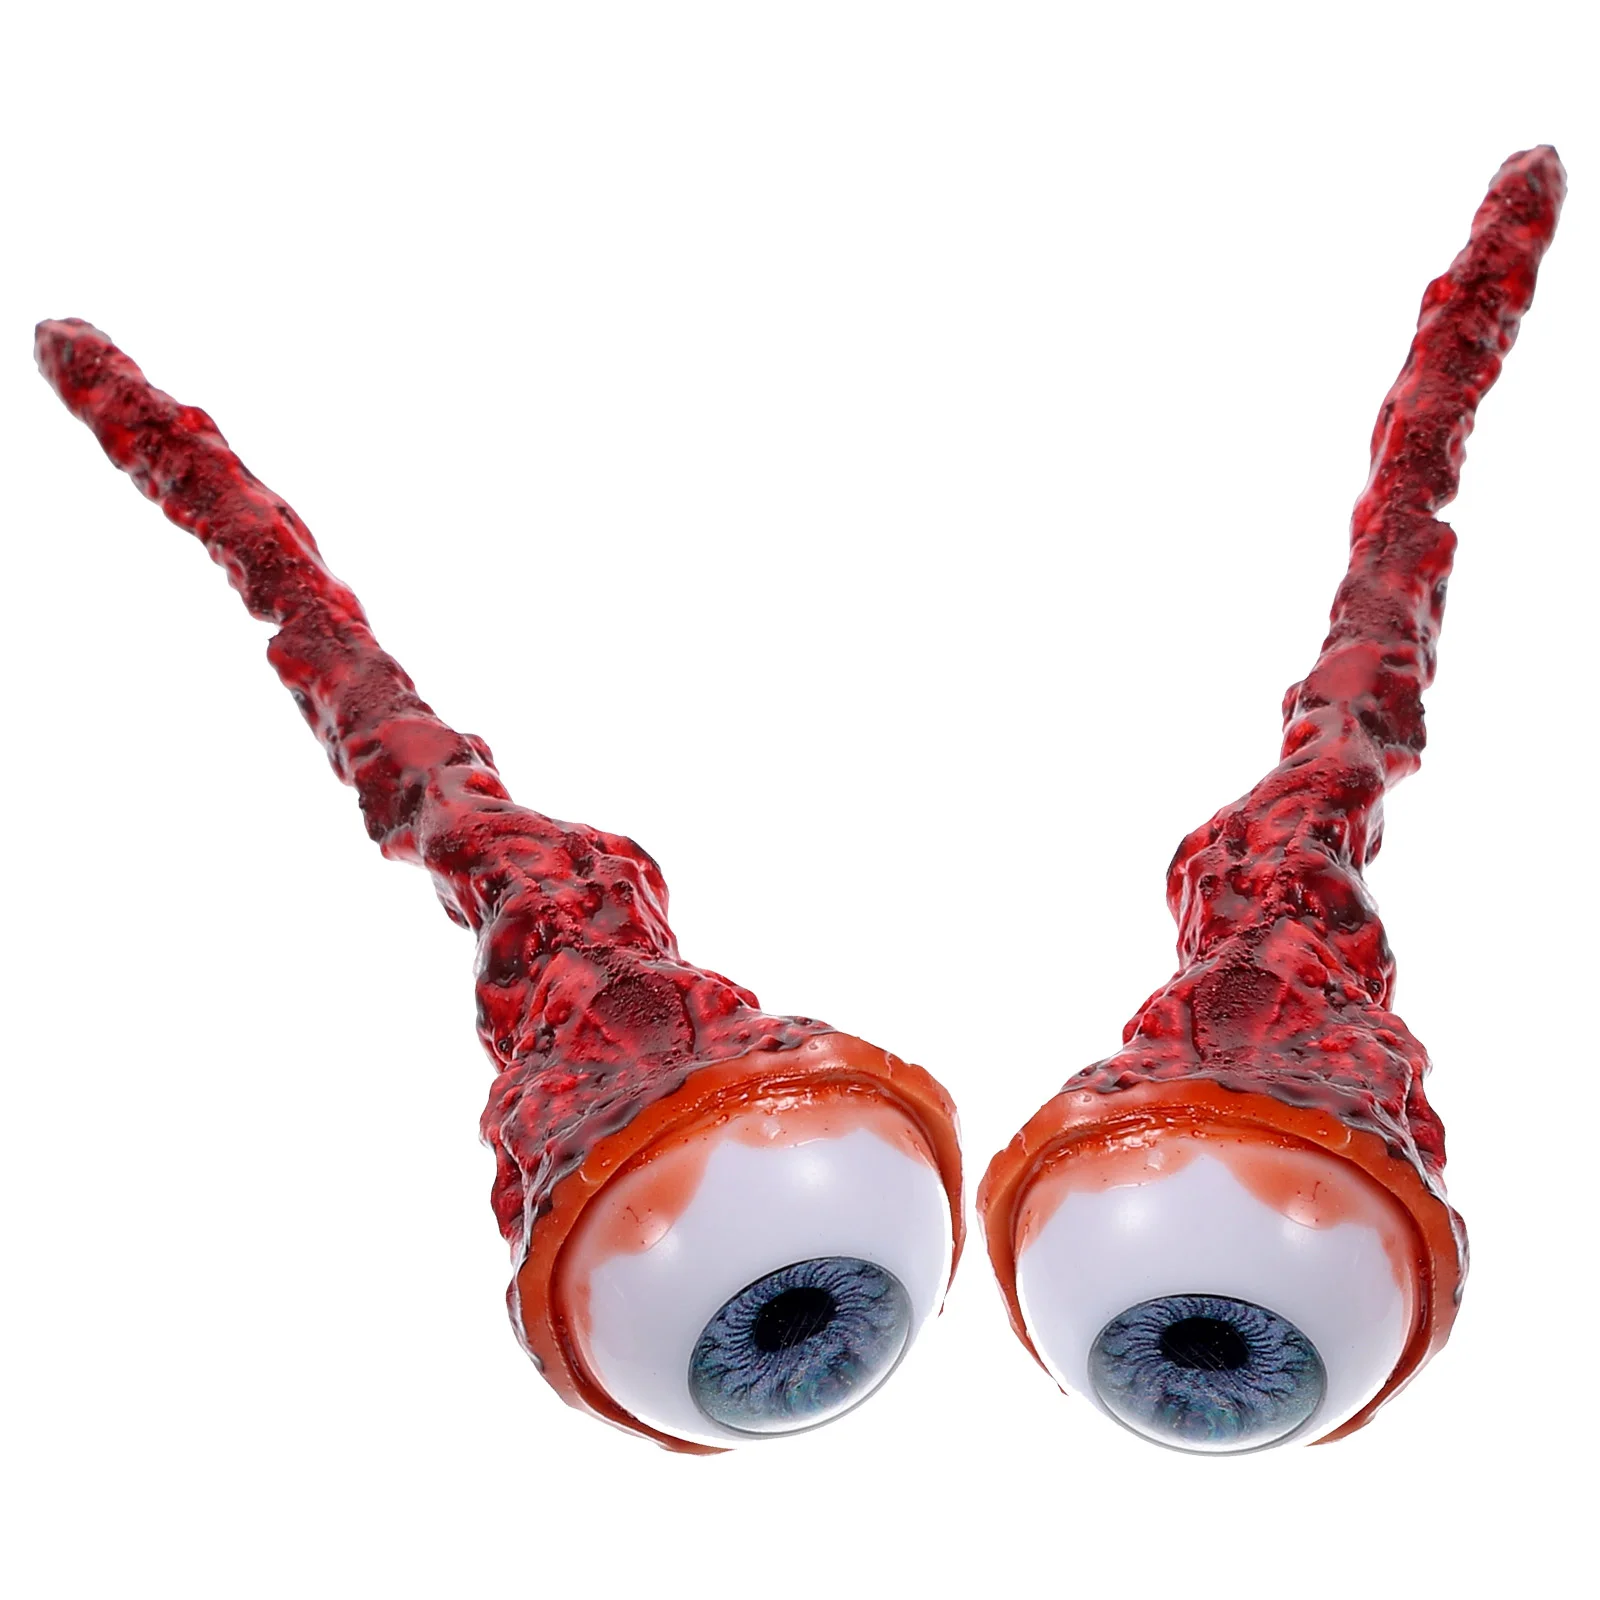 

2 Pcs Halloween Outdoor Decorations Portable Eyeballs Party Accessory Festival Horror Toy Emulsion Interesting Props